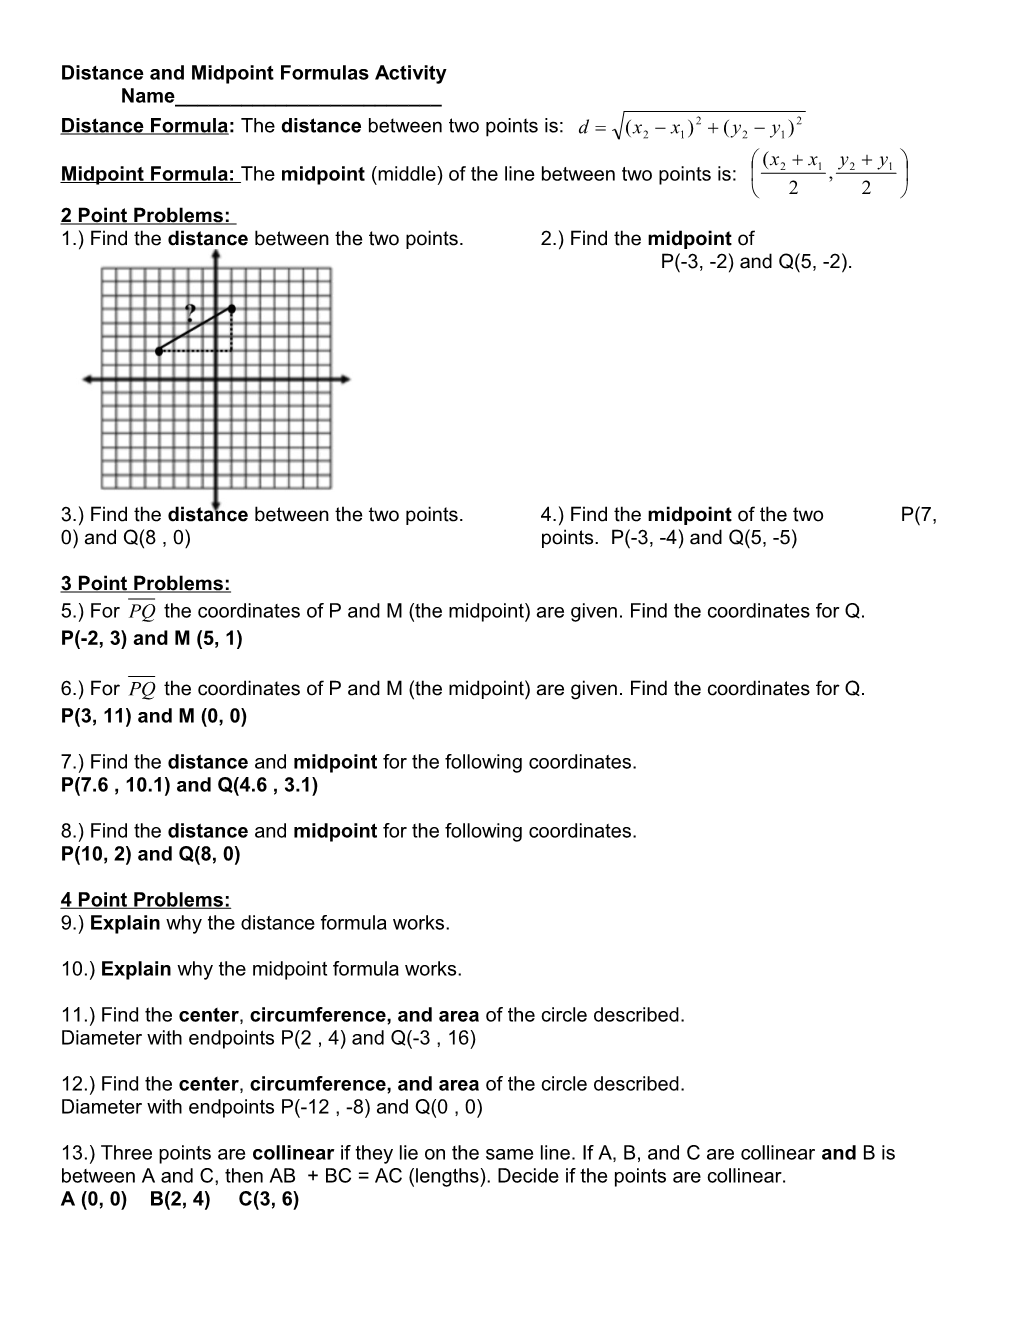 Distance and Midpoint Formulas Activity